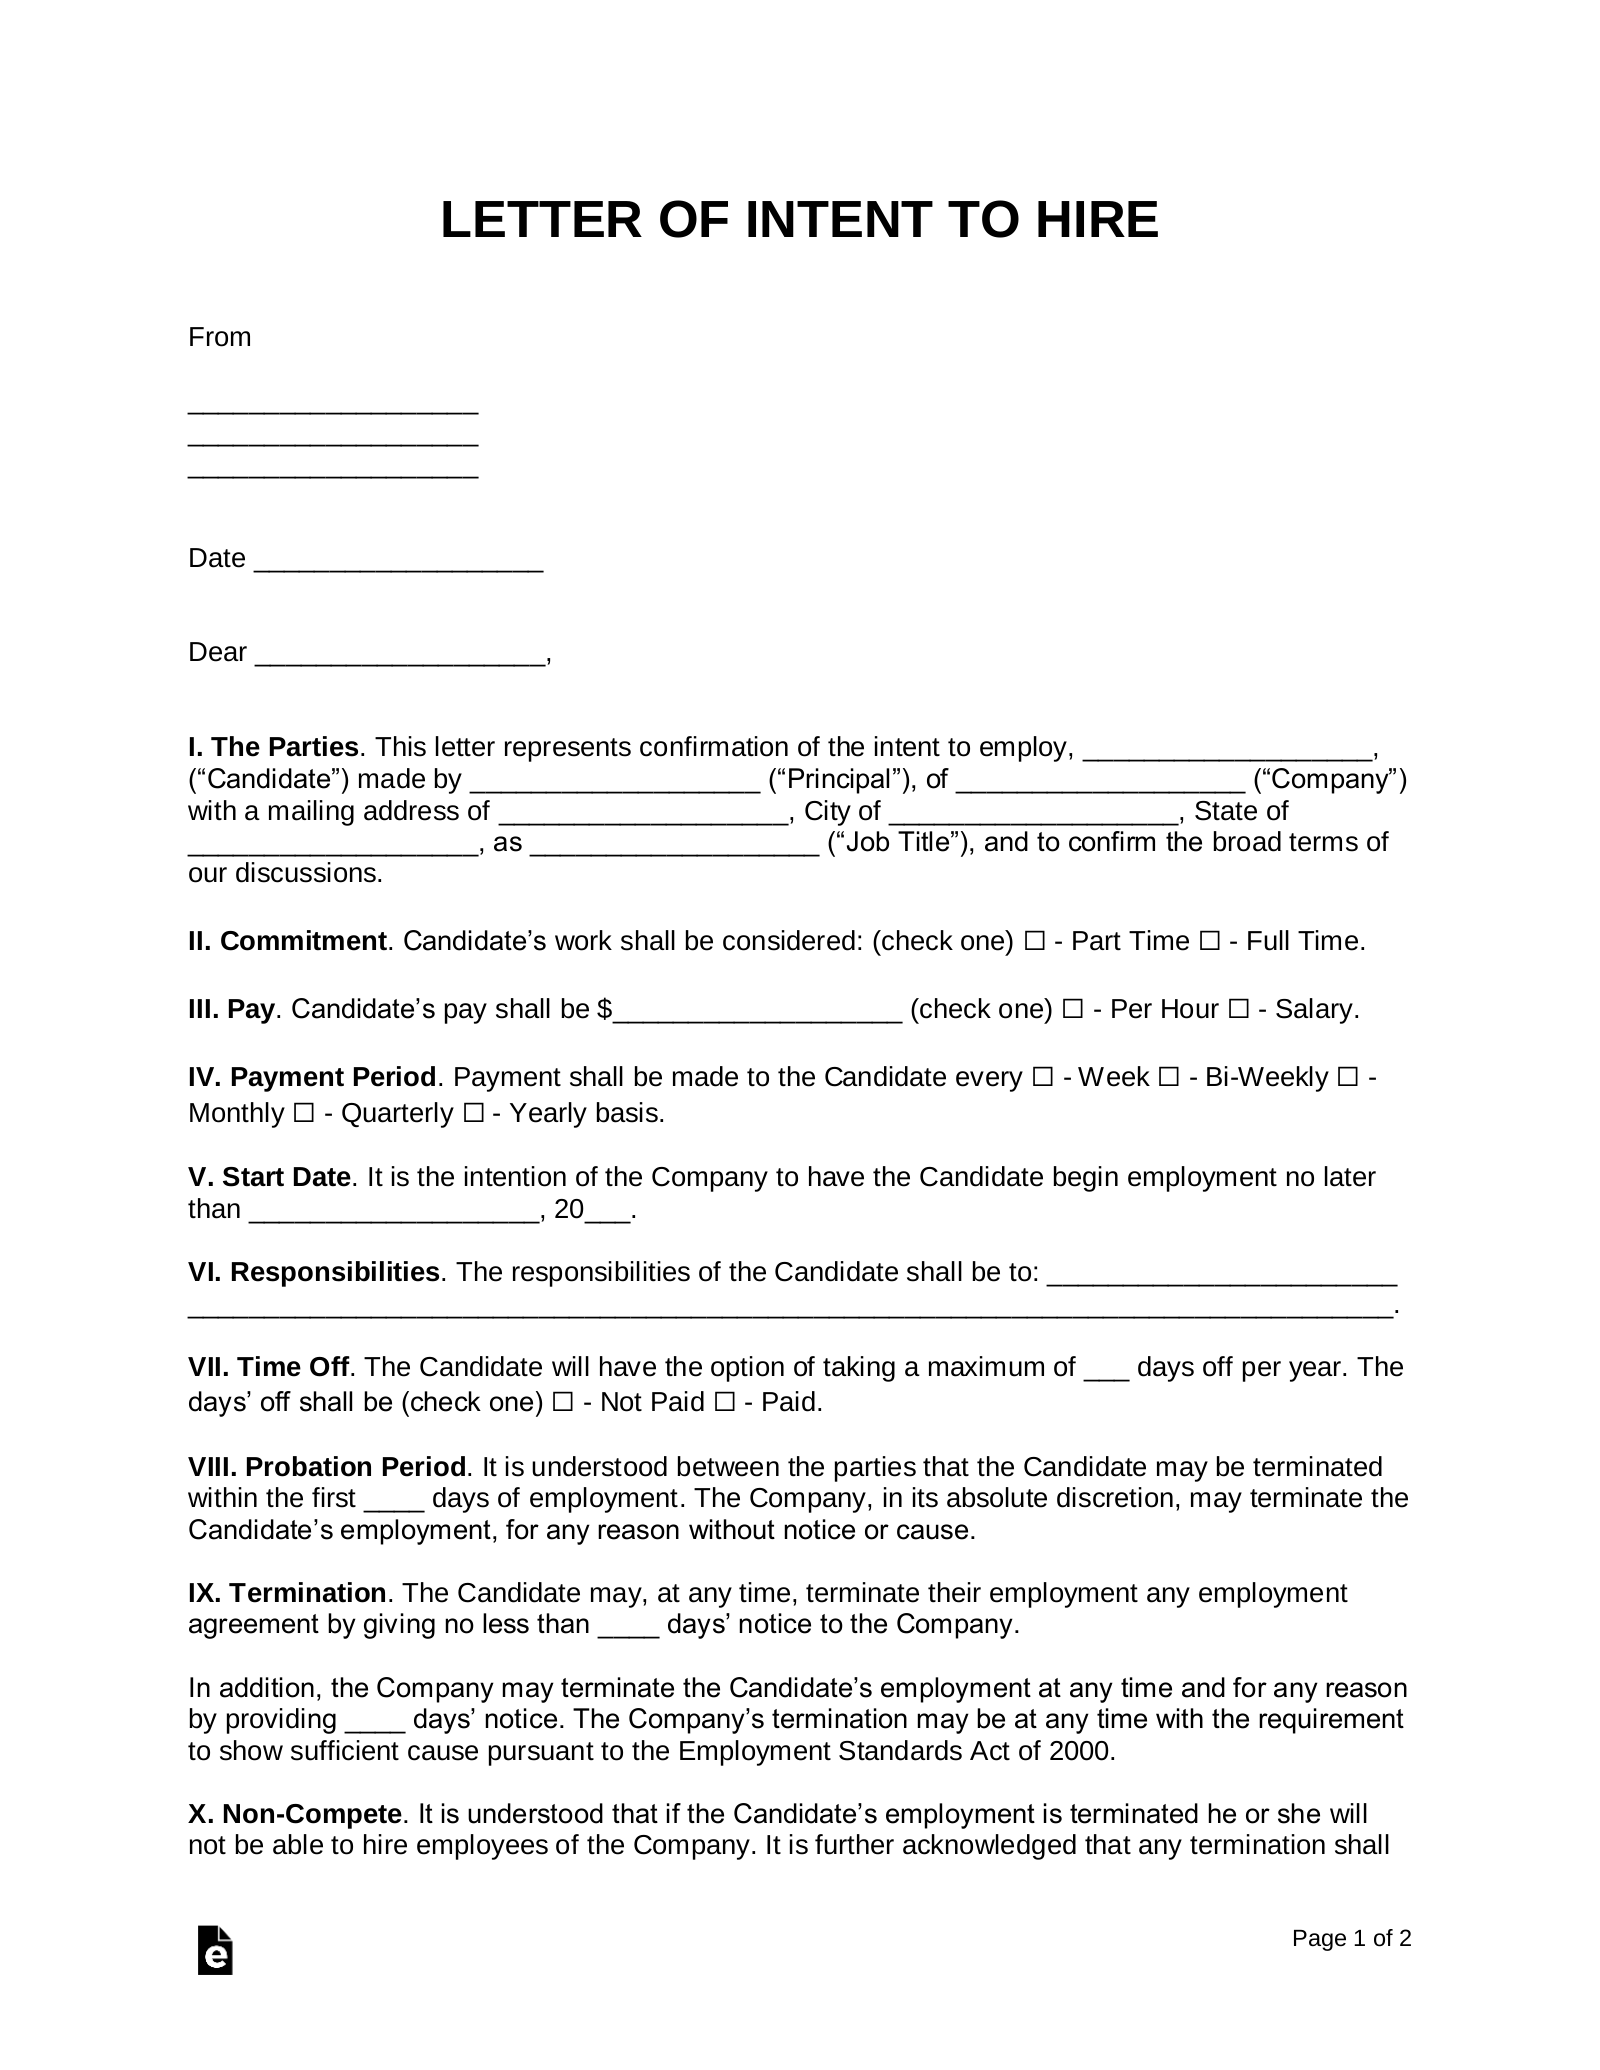 Letter Of Intent For A Teaching Job from eforms.com